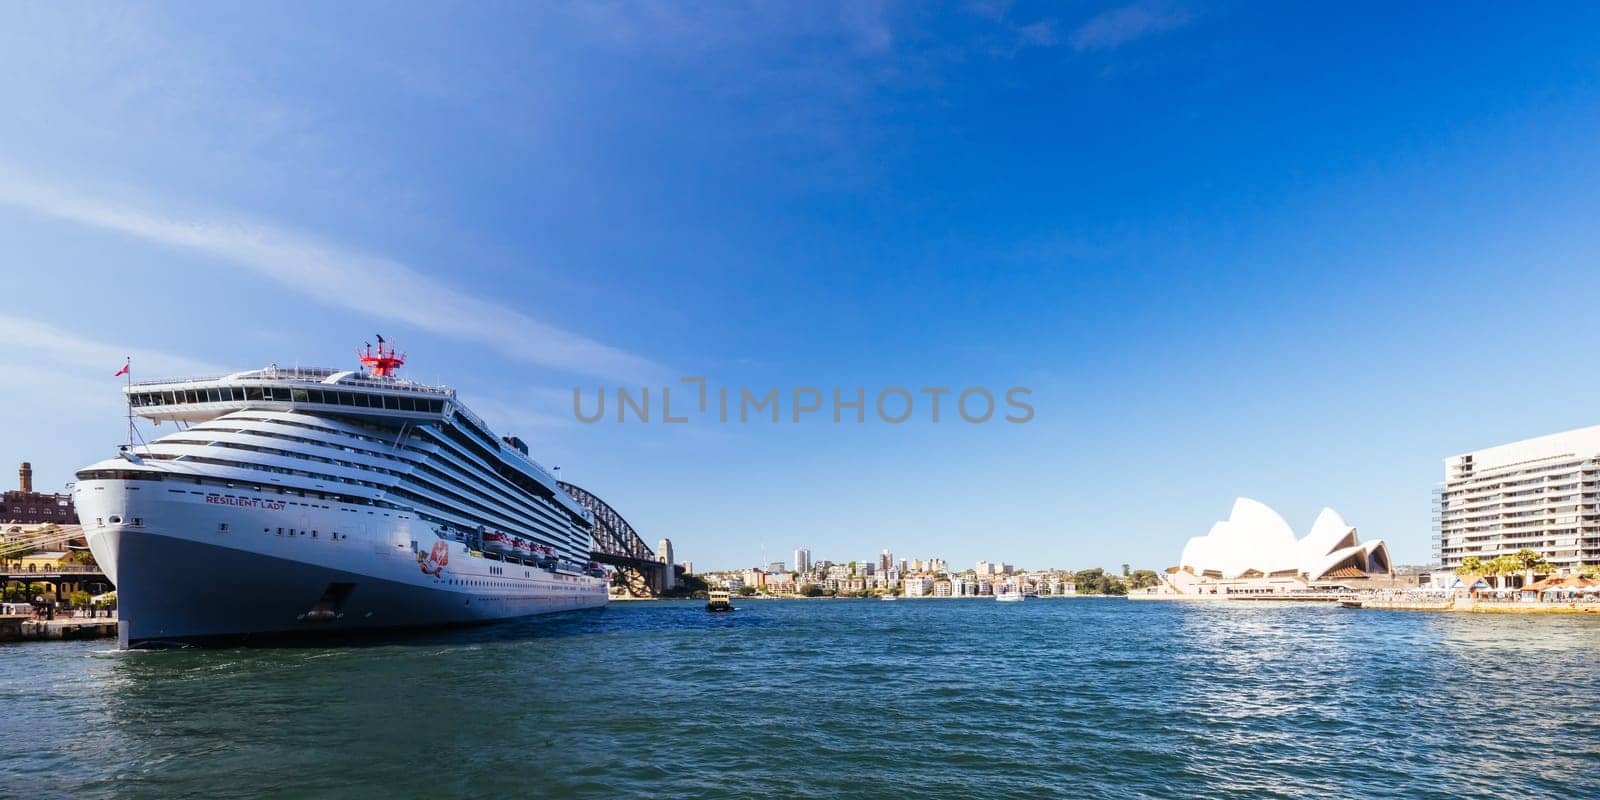 Virgin Voyages' Resilient Lady Maiden Voyage to Sydney by FiledIMAGE